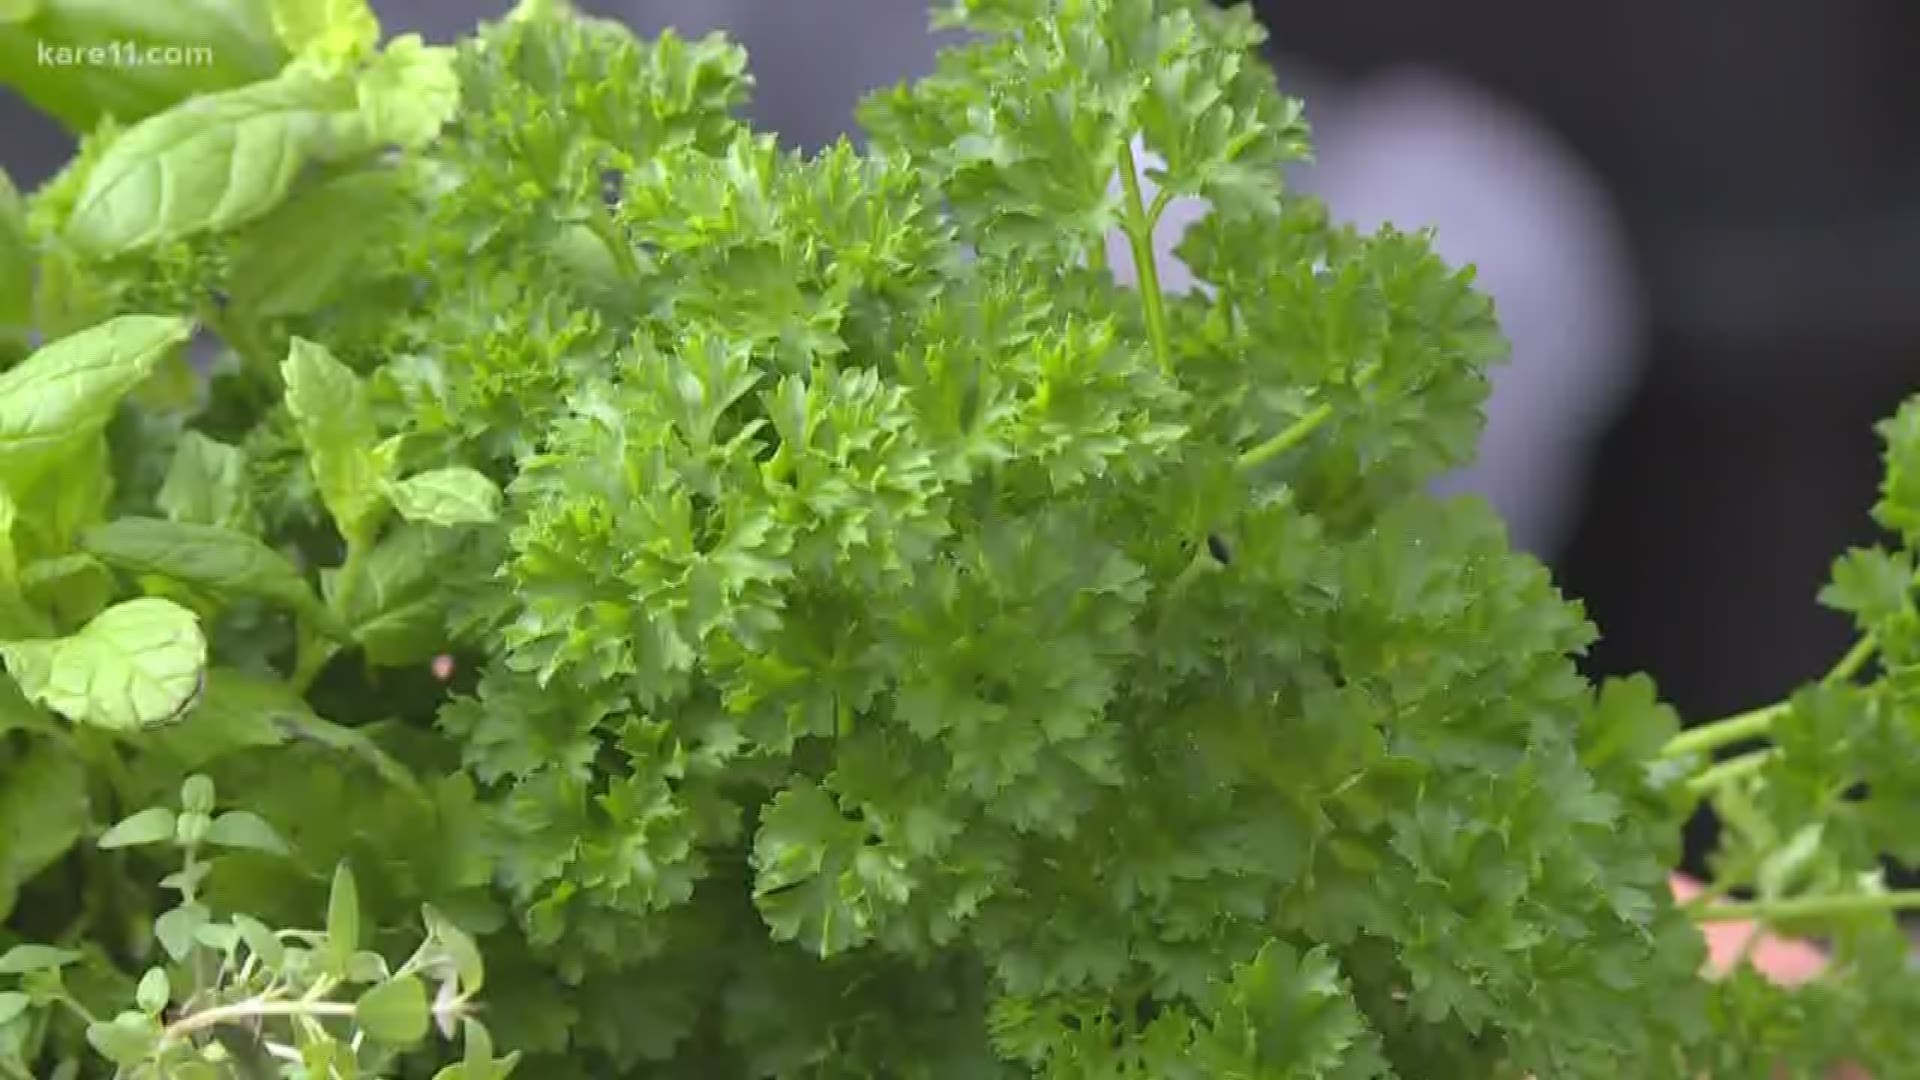 Hear about the best tips to keeping you herbs thriving this winter!